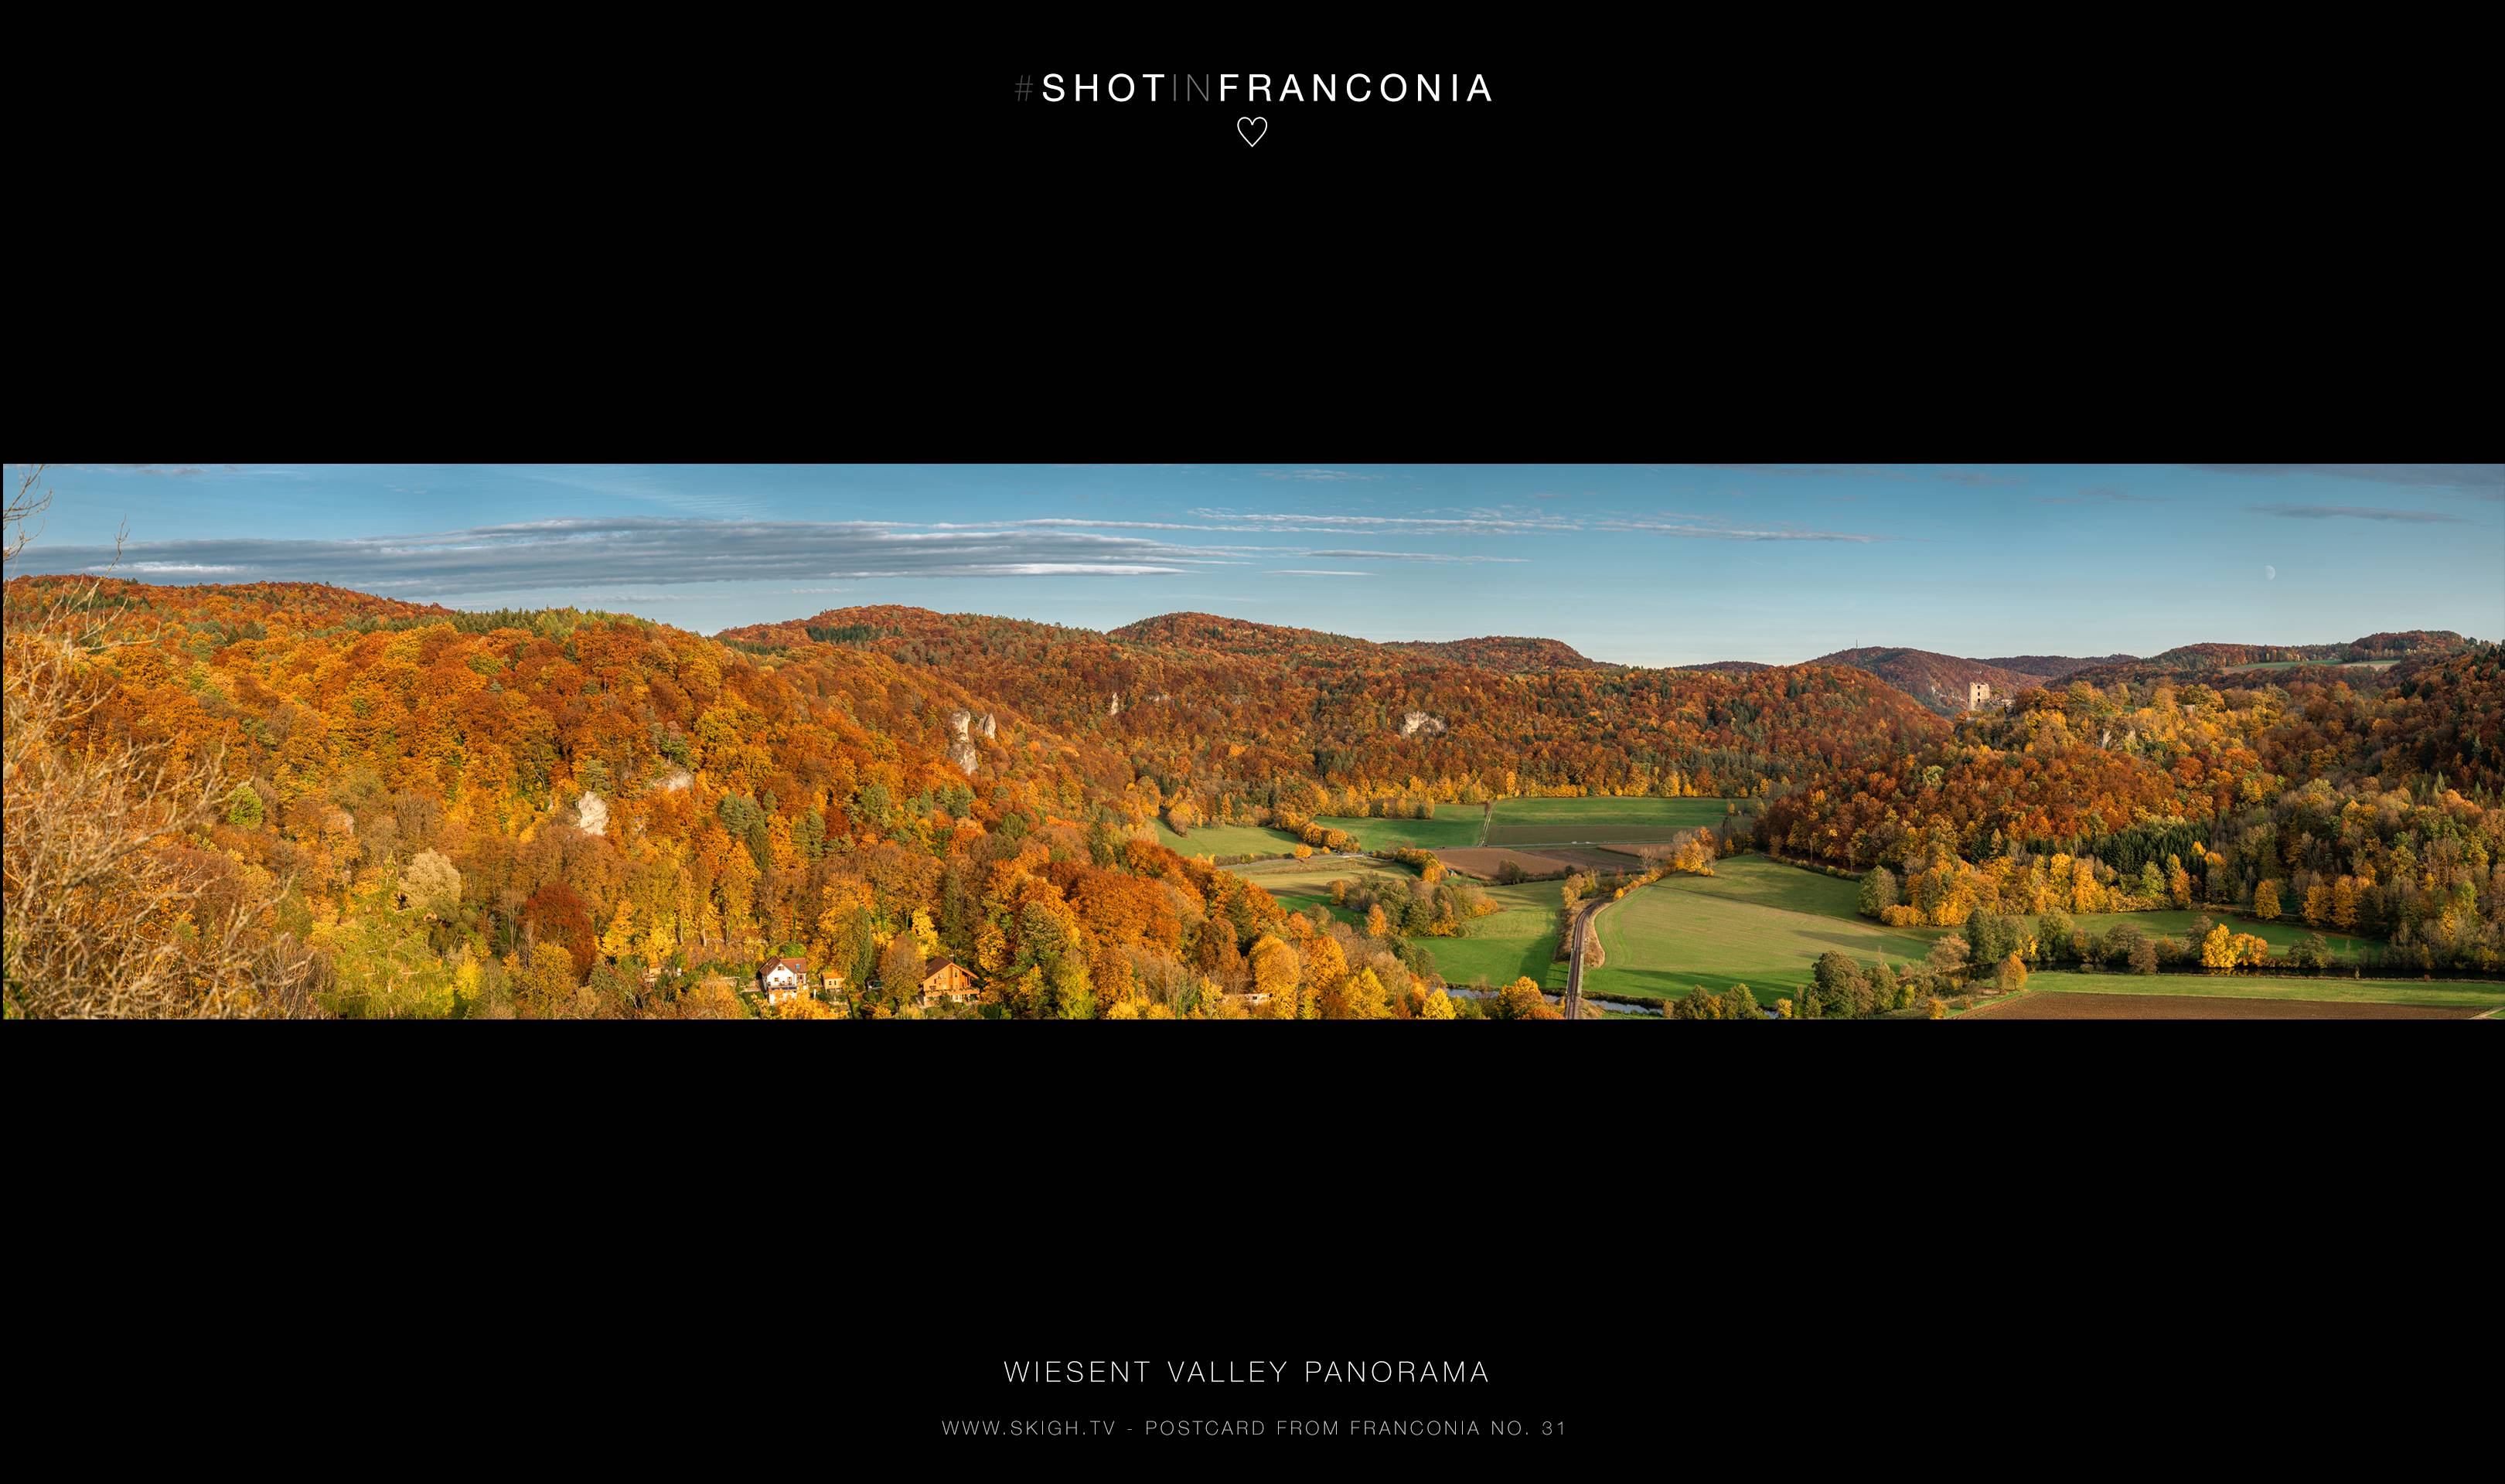 Wiesent Valley panorama